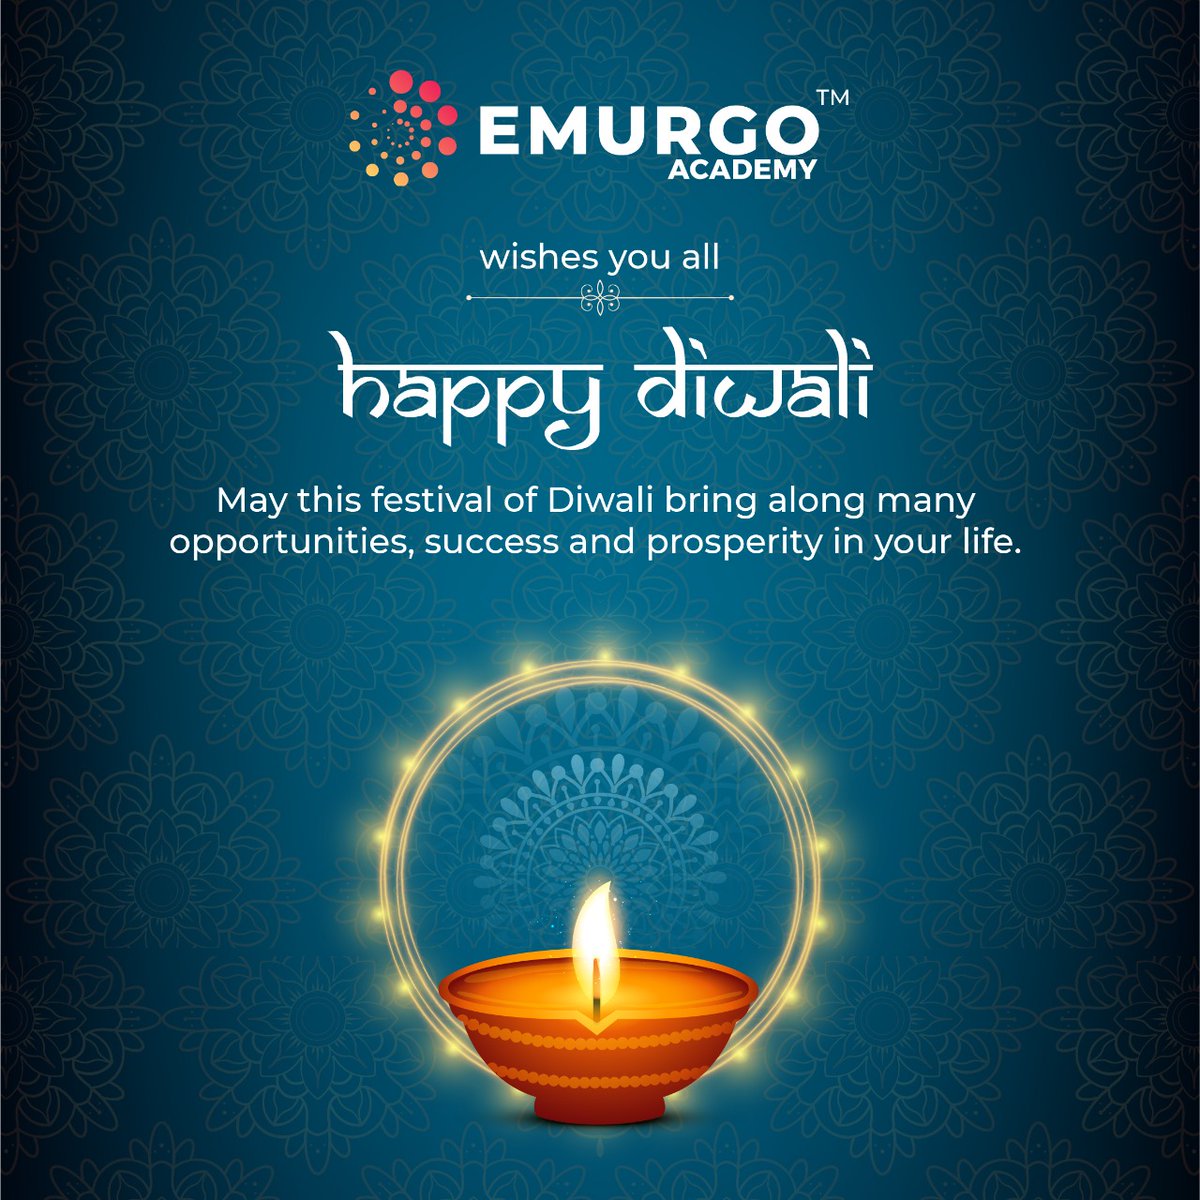 May the festival of lights usher in a better world for all. @emurgo_in wishes you a happy, healthy, and prosperous Diwali. #Diwali #Diwali2022